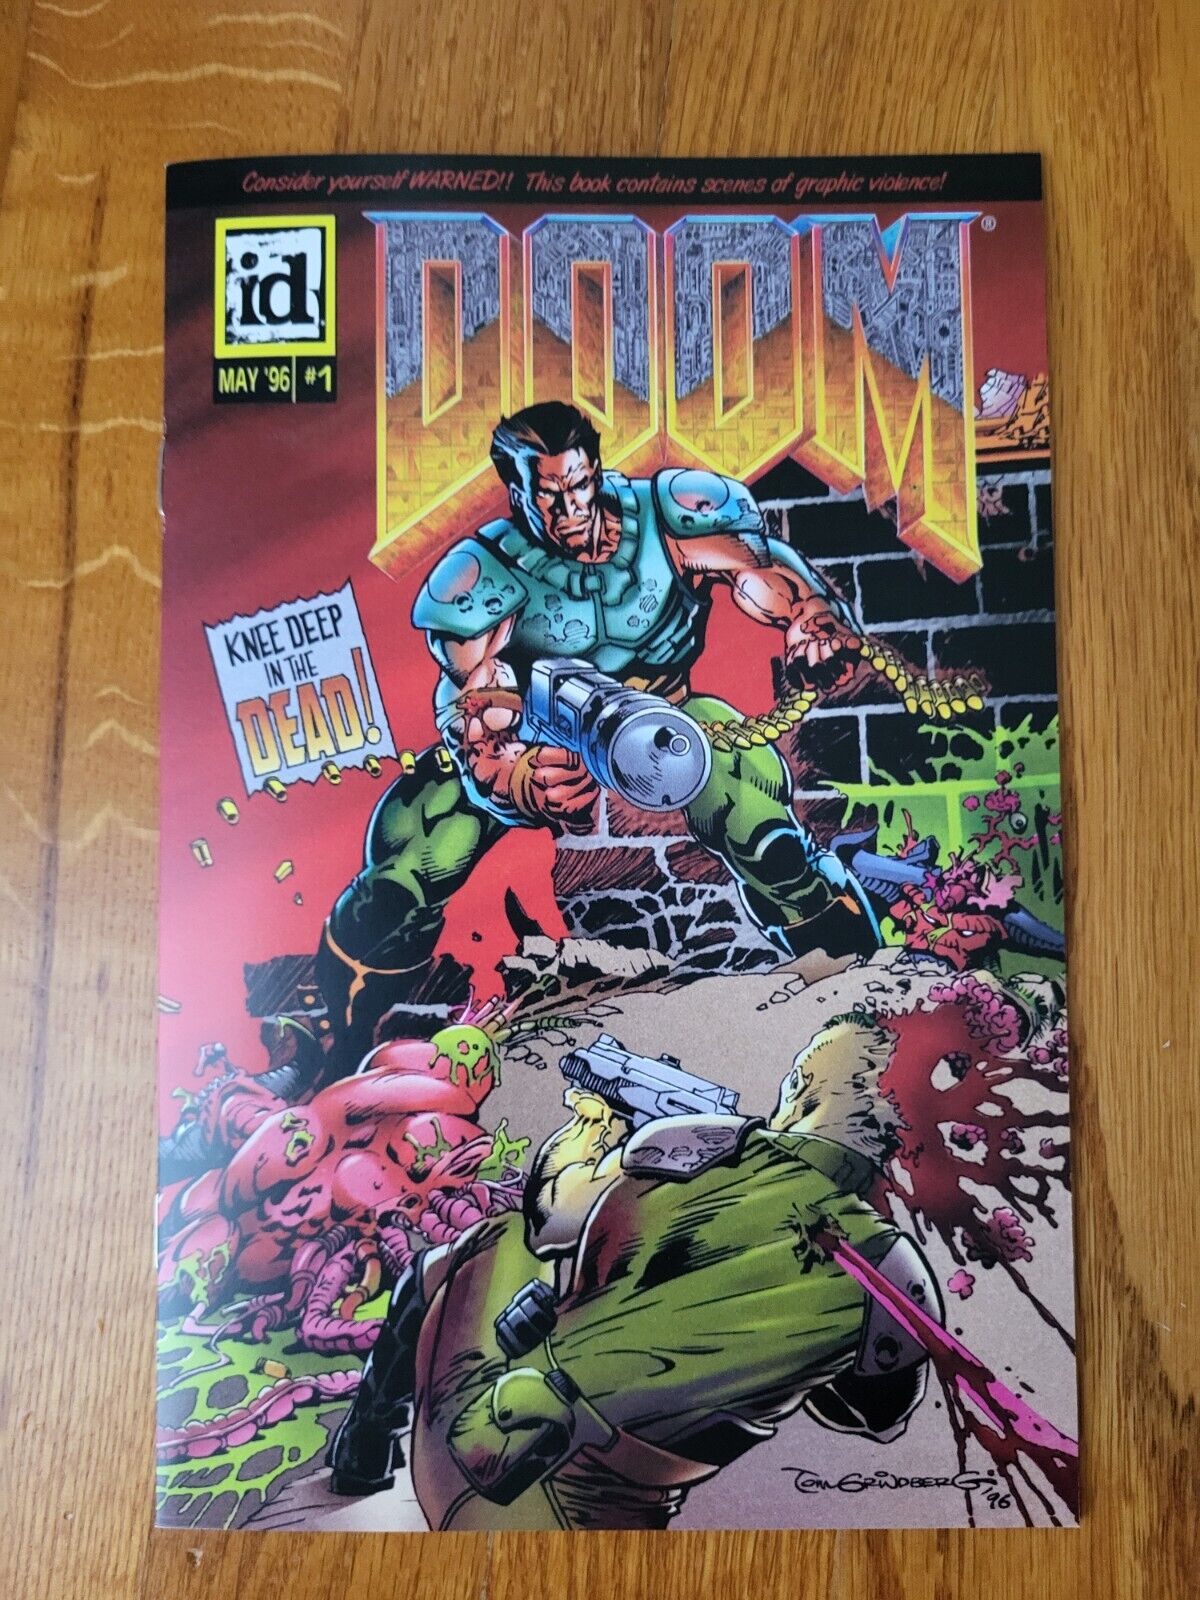 Doom Video Game One-Shot Reprint Comic id Software Horror Knee Deep in the Dead